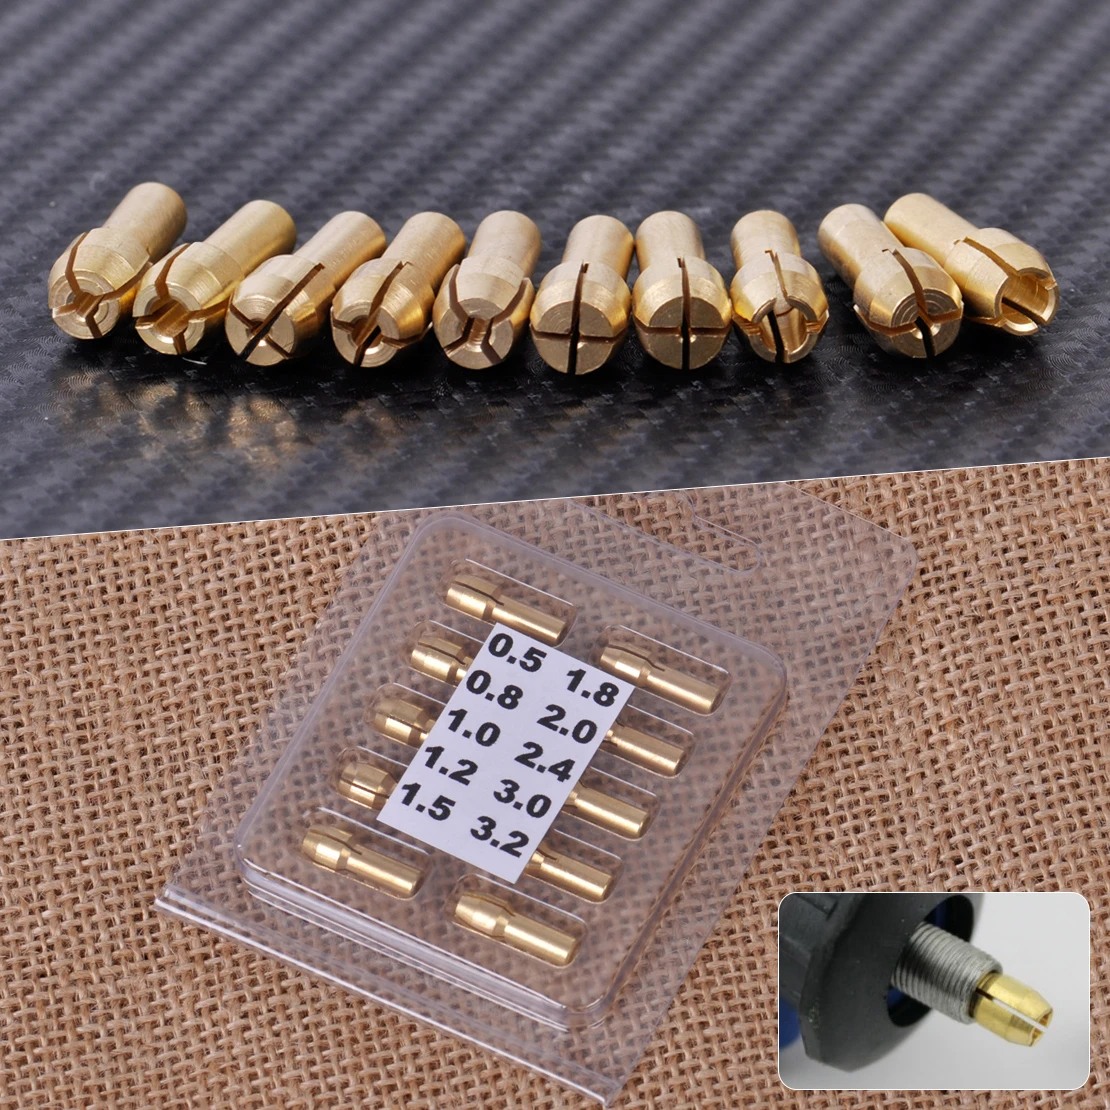 10x Brass Chuck Collet Drill Bit 0.5-3.2mm Set Fit Nut for Rotary Tool